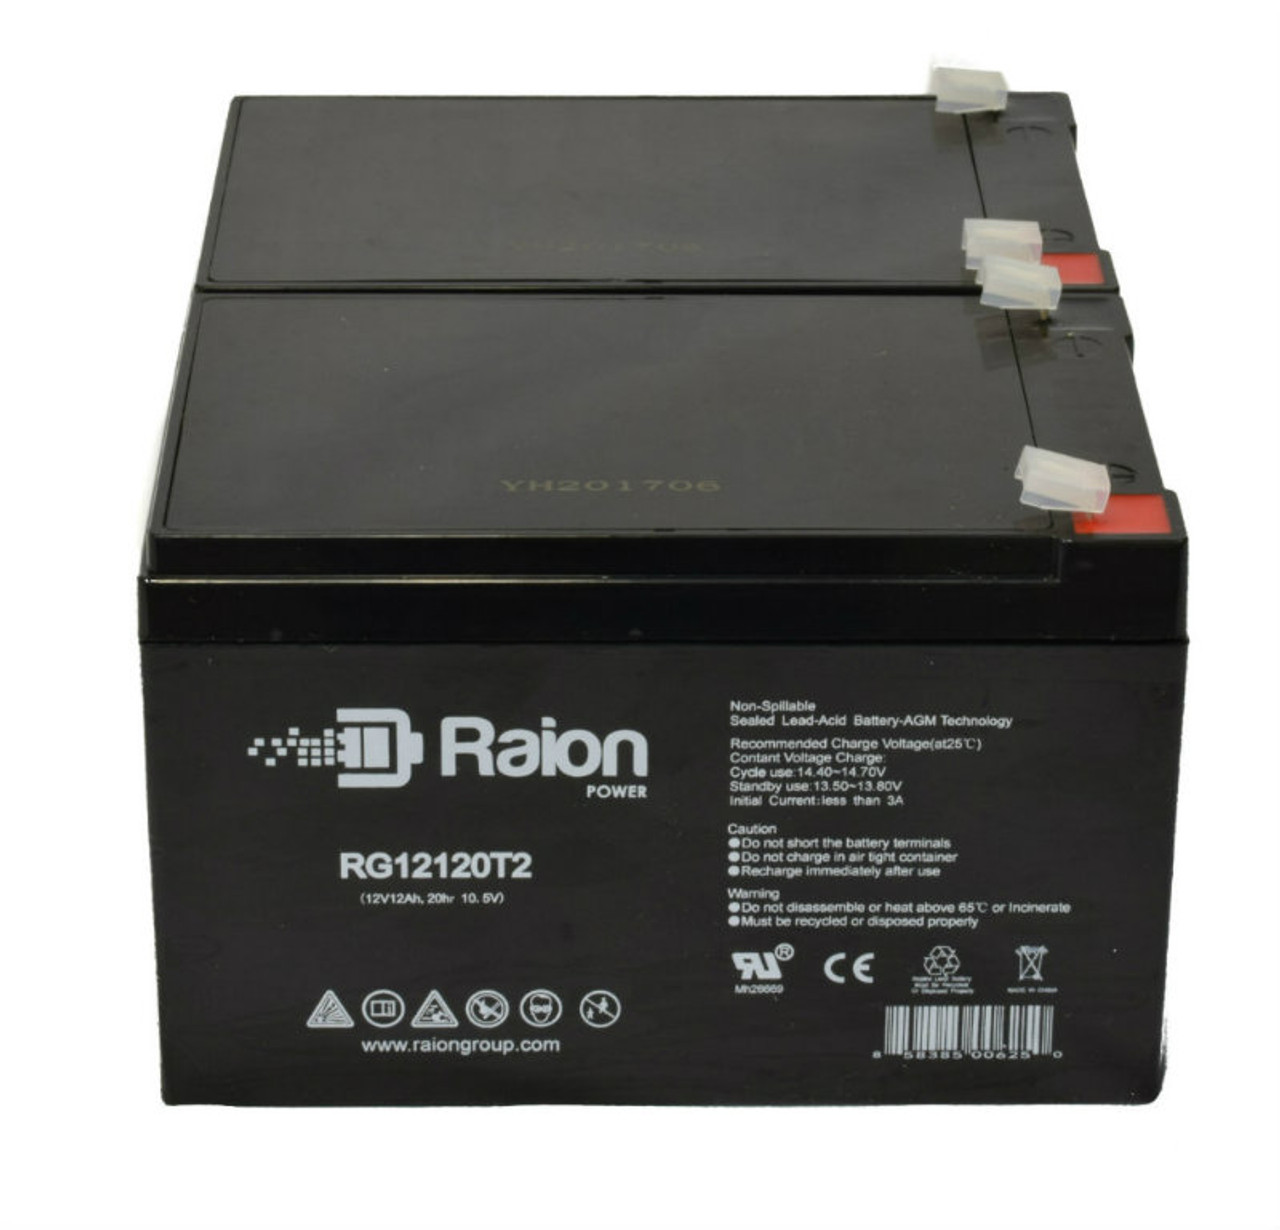 Raion Power 12V 12Ah Non-Spillable Compatible Replacement Battery for Multipower MP12-12 - (2 Pack)